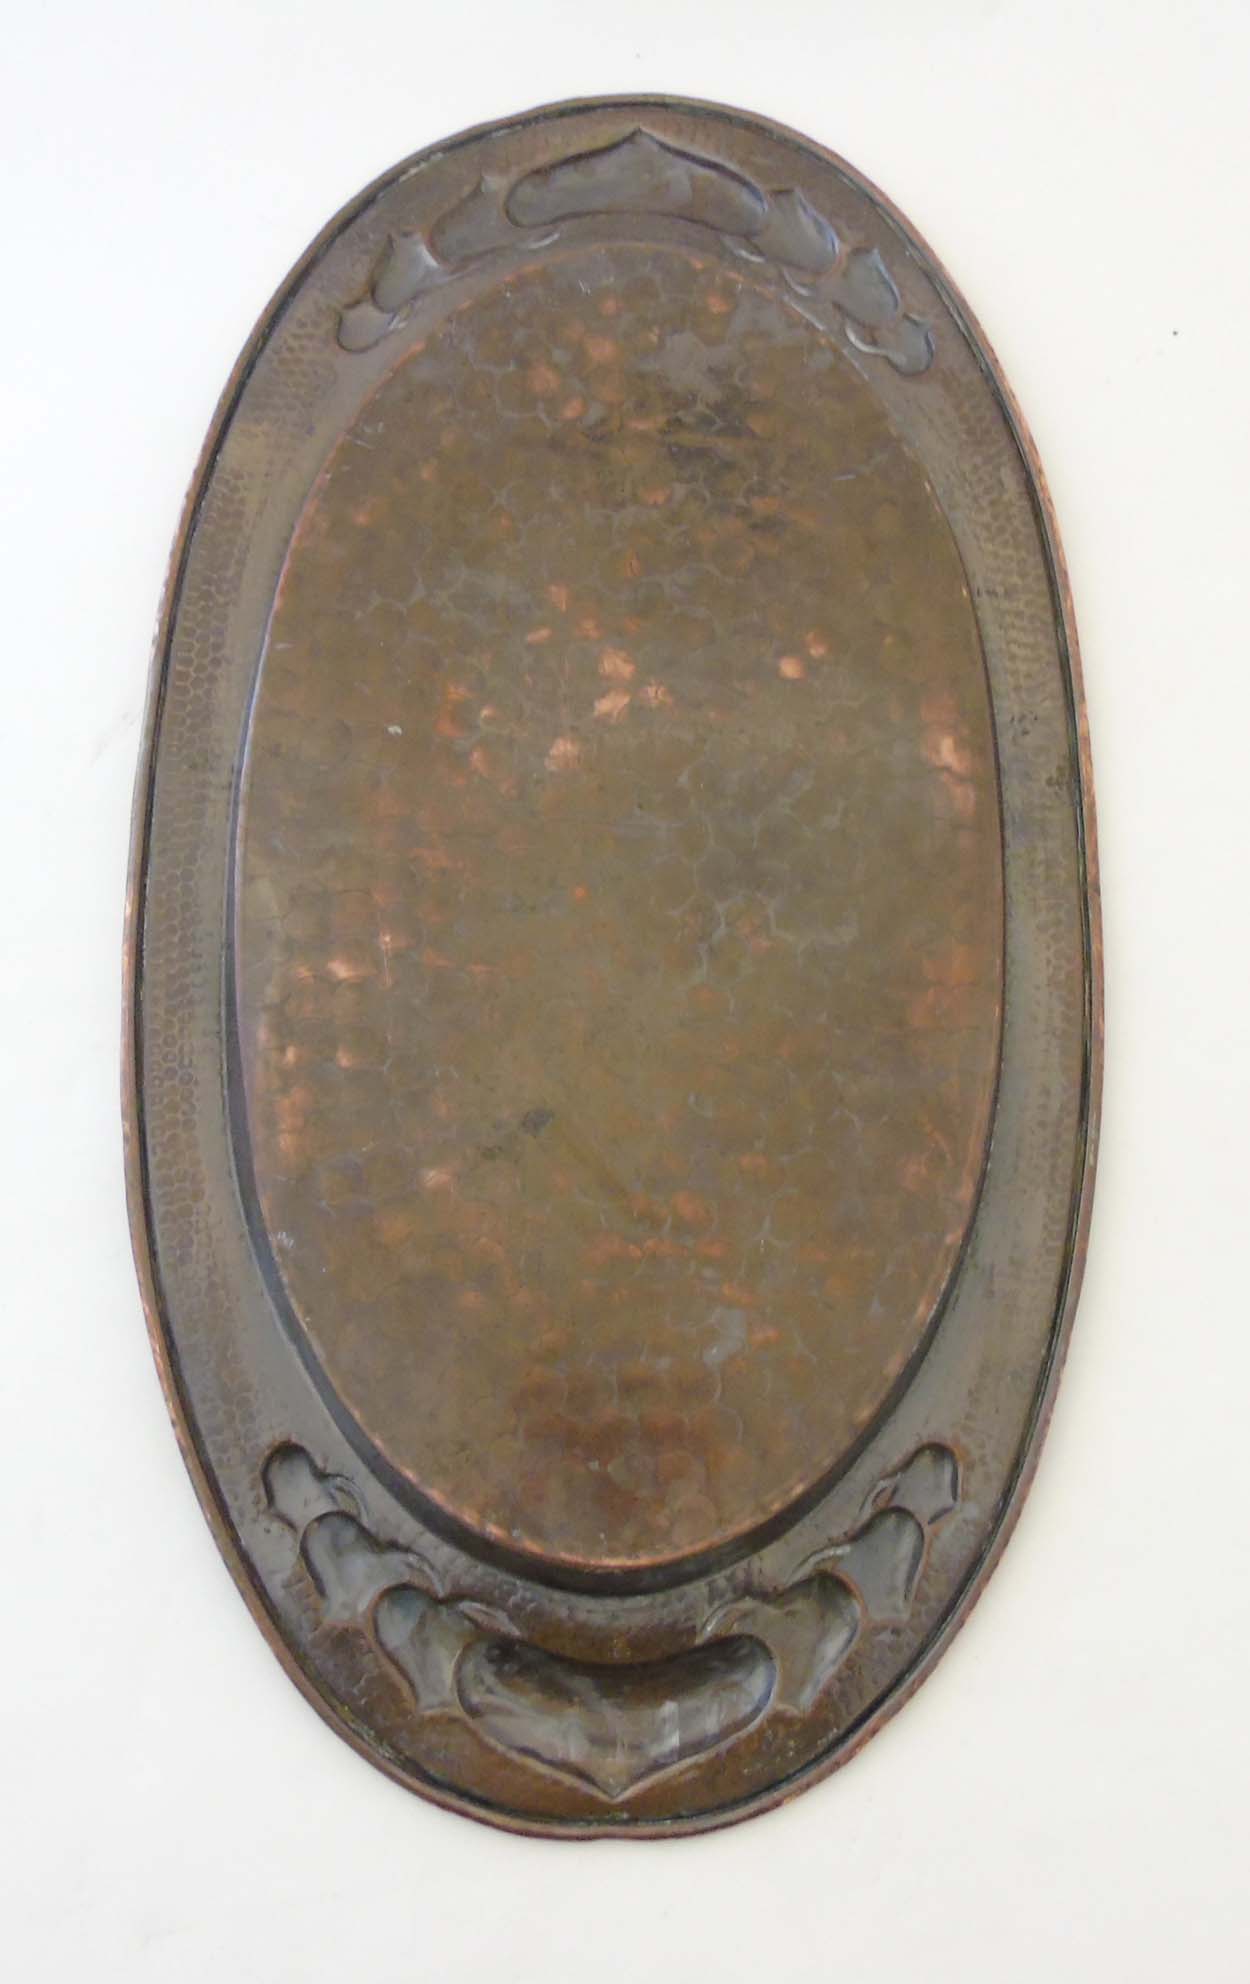 Art and Crafts Decorative metalware : An embossed and plannished large oval butlers tray with heart - Image 2 of 7